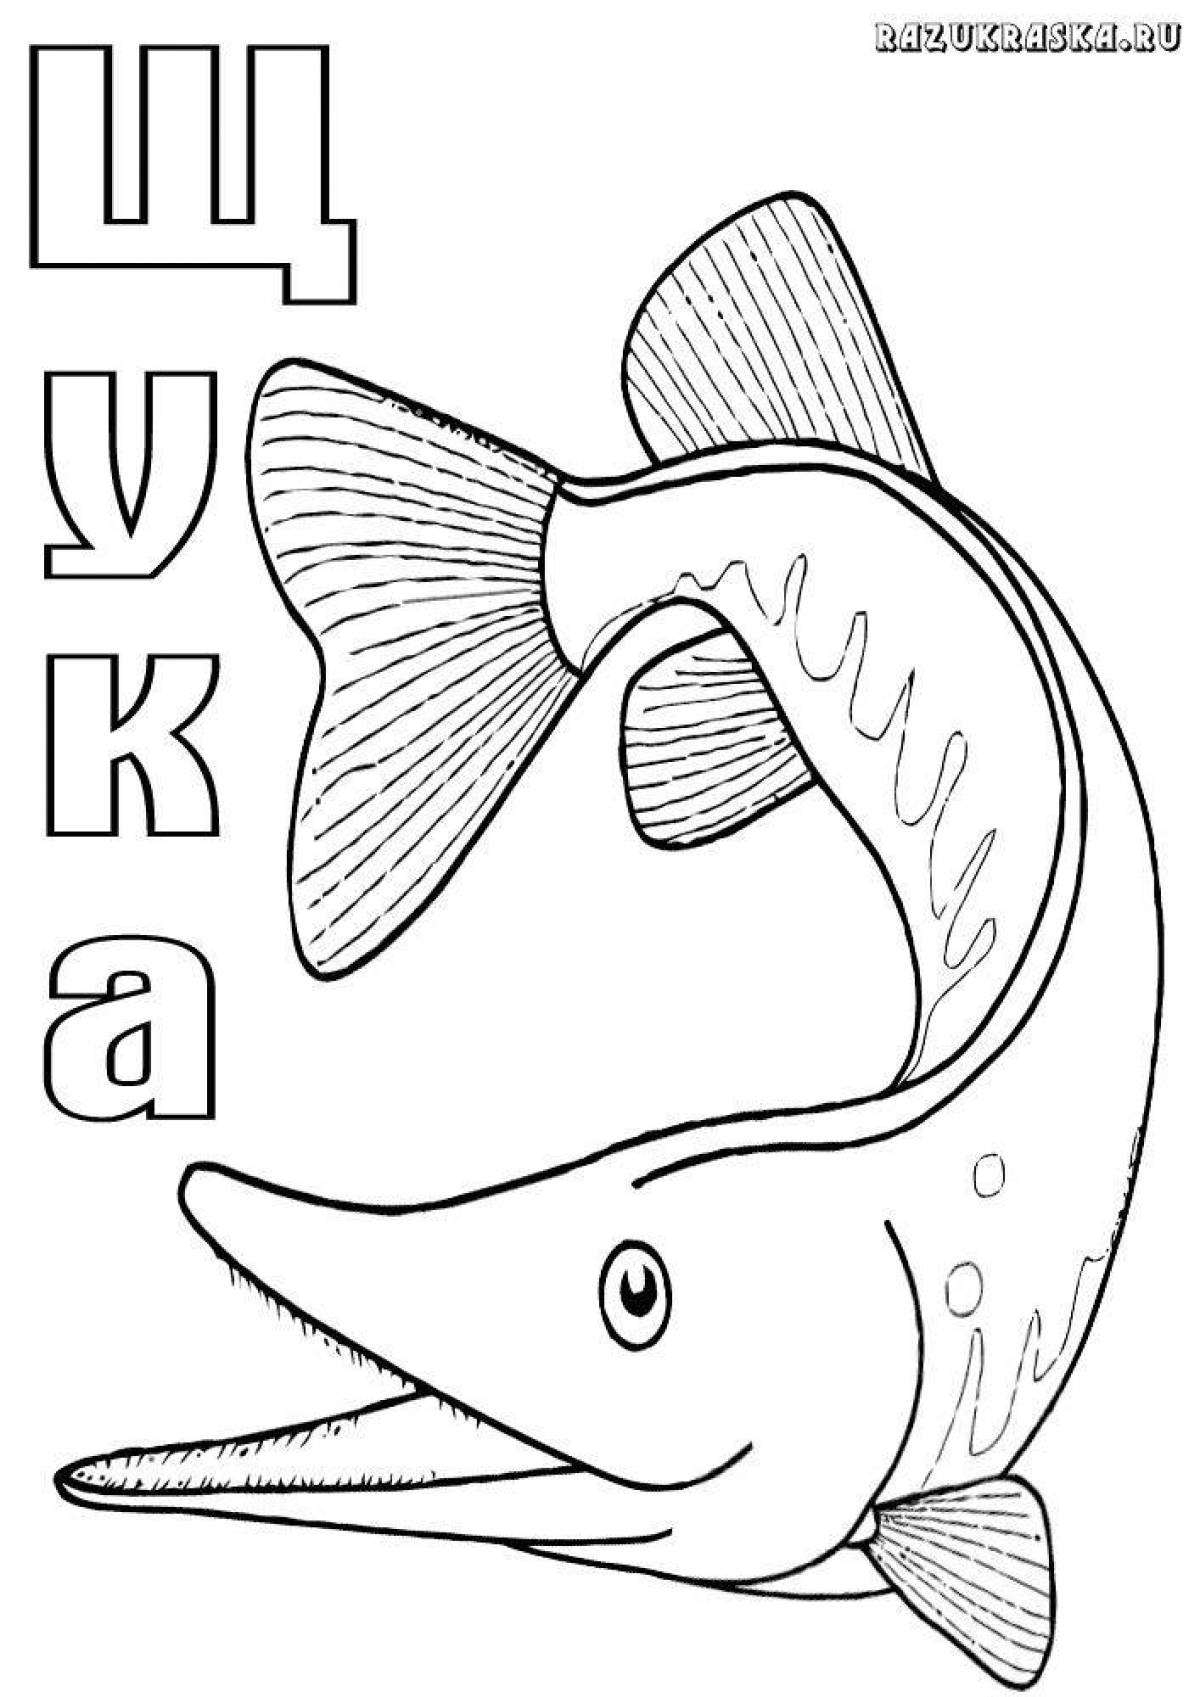 Incredible pike coloring book for kids